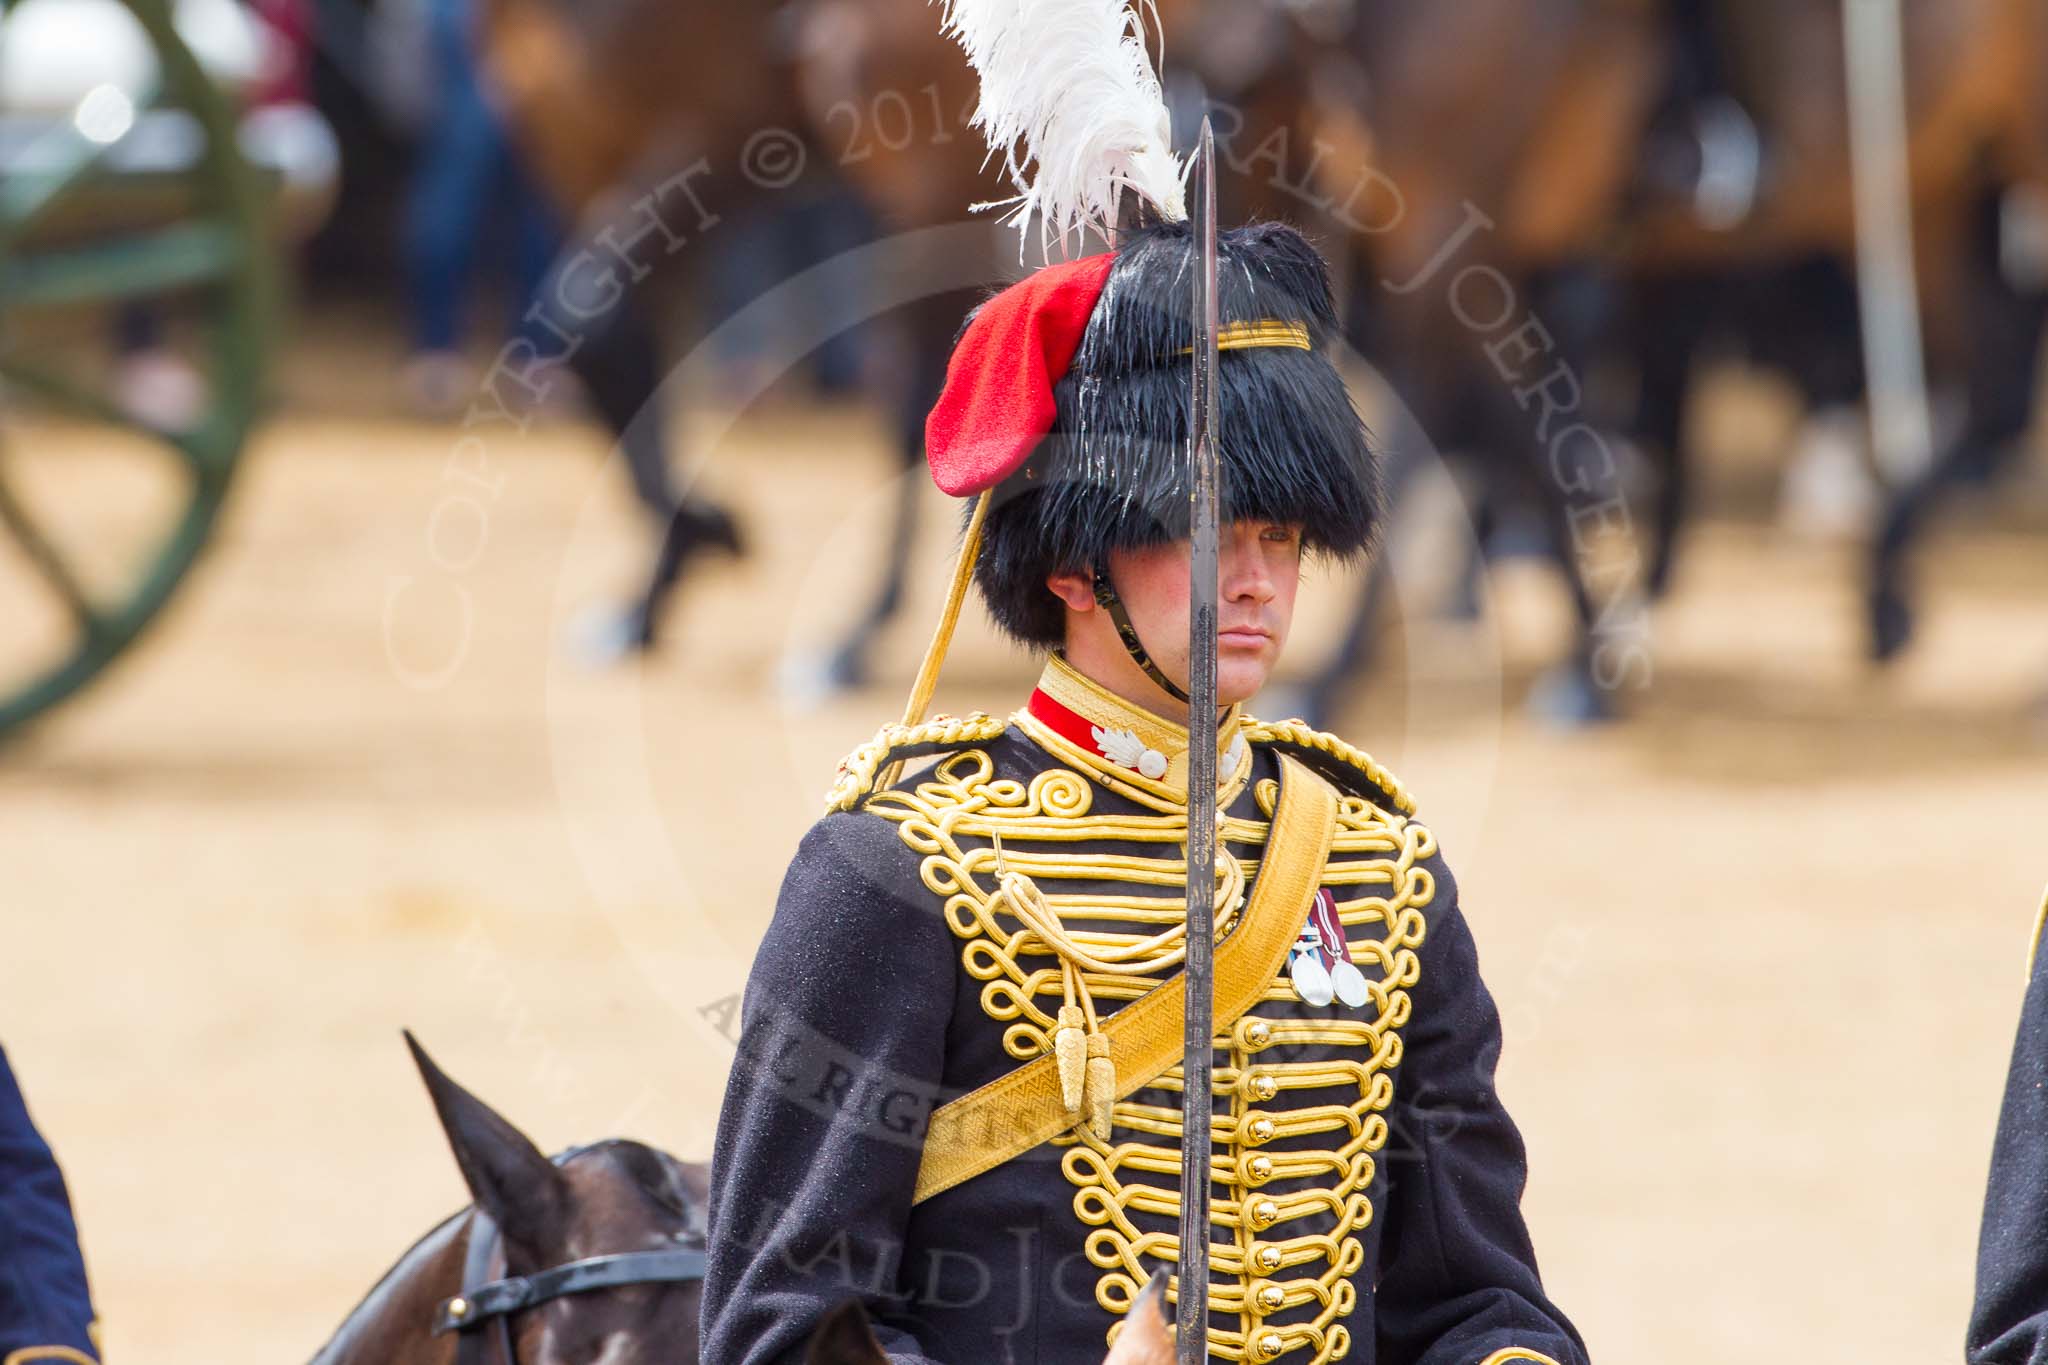 The Colonel's Review 2014.
Horse Guards Parade, Westminster,
London,

United Kingdom,
on 07 June 2014 at 11:53, image #604